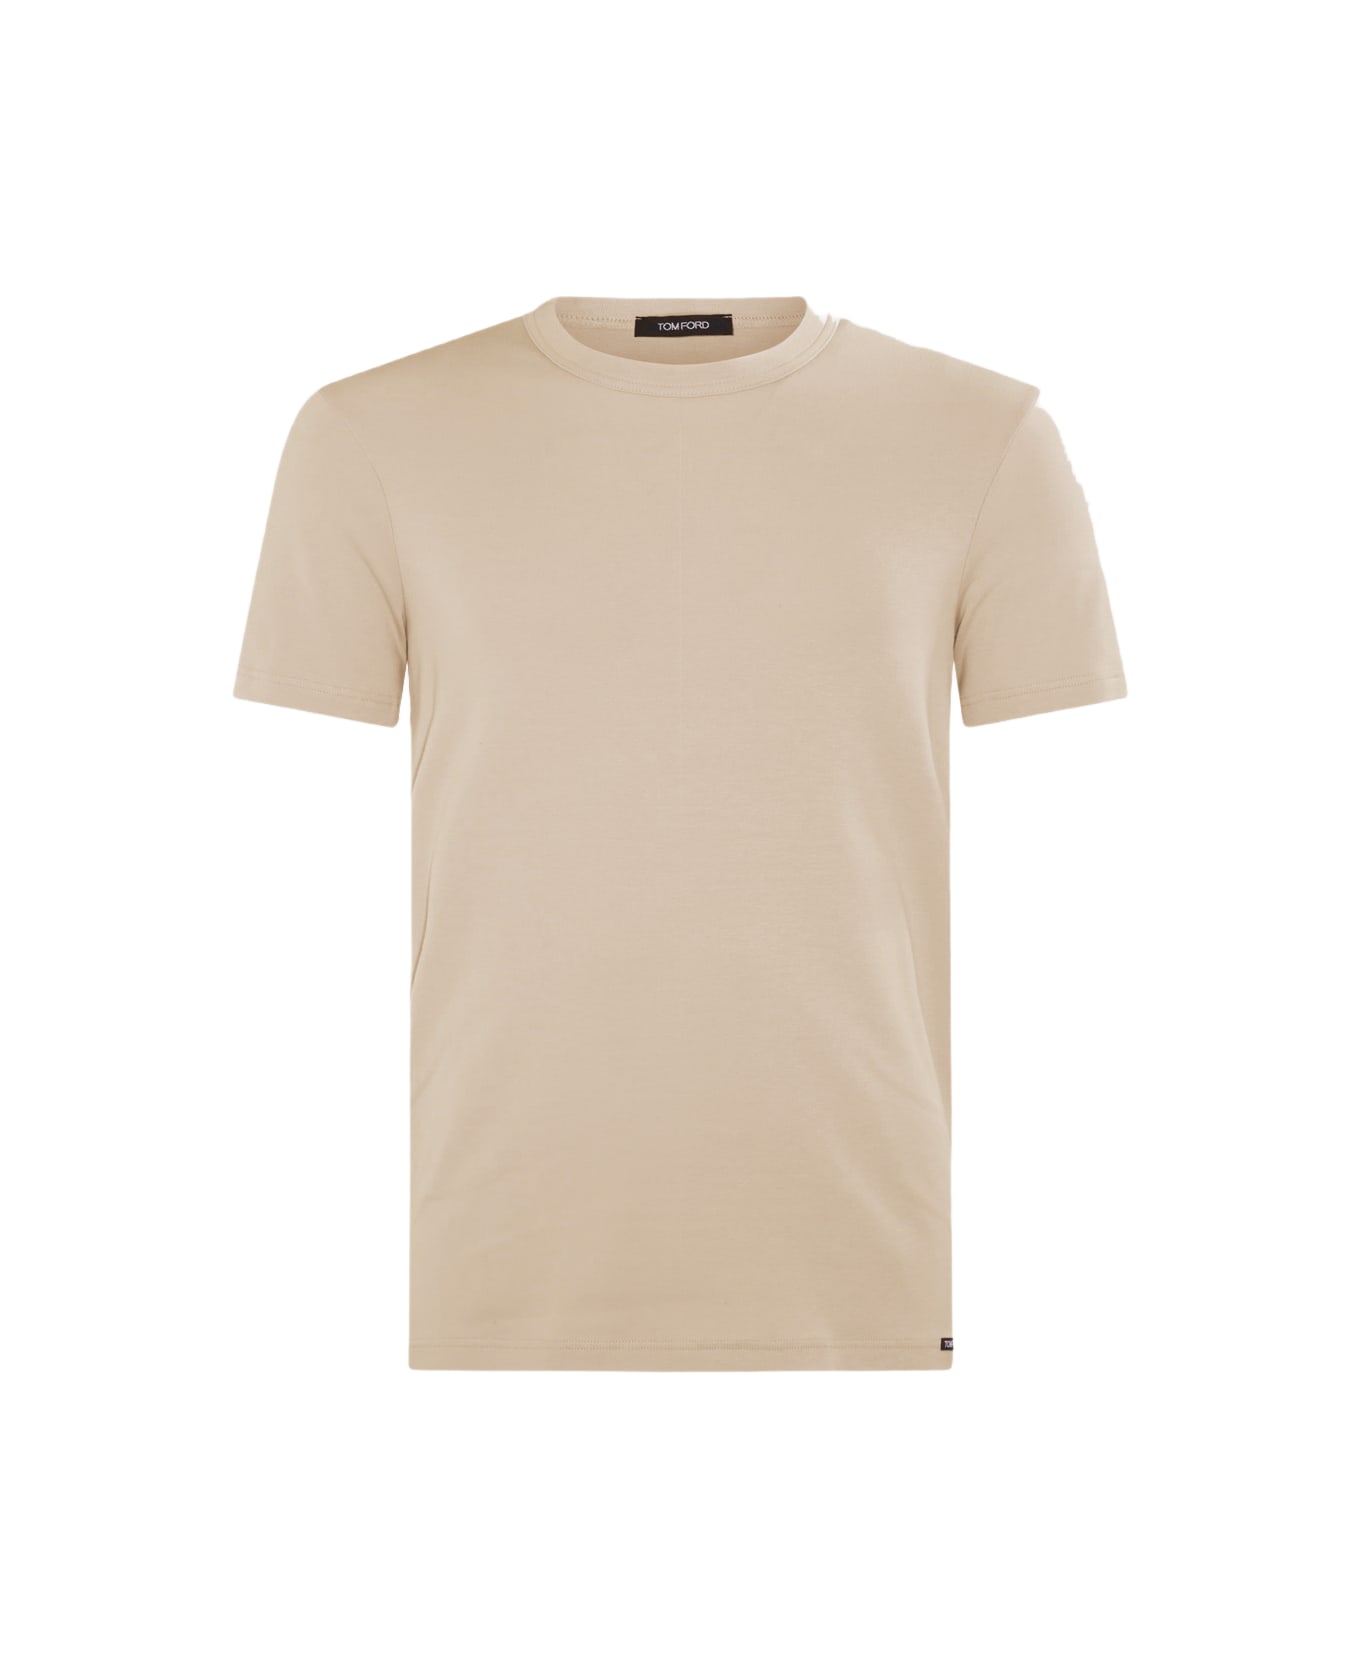 Tom Ford Beige Cotton Blend T-shirt - NUDE 1 シャツ